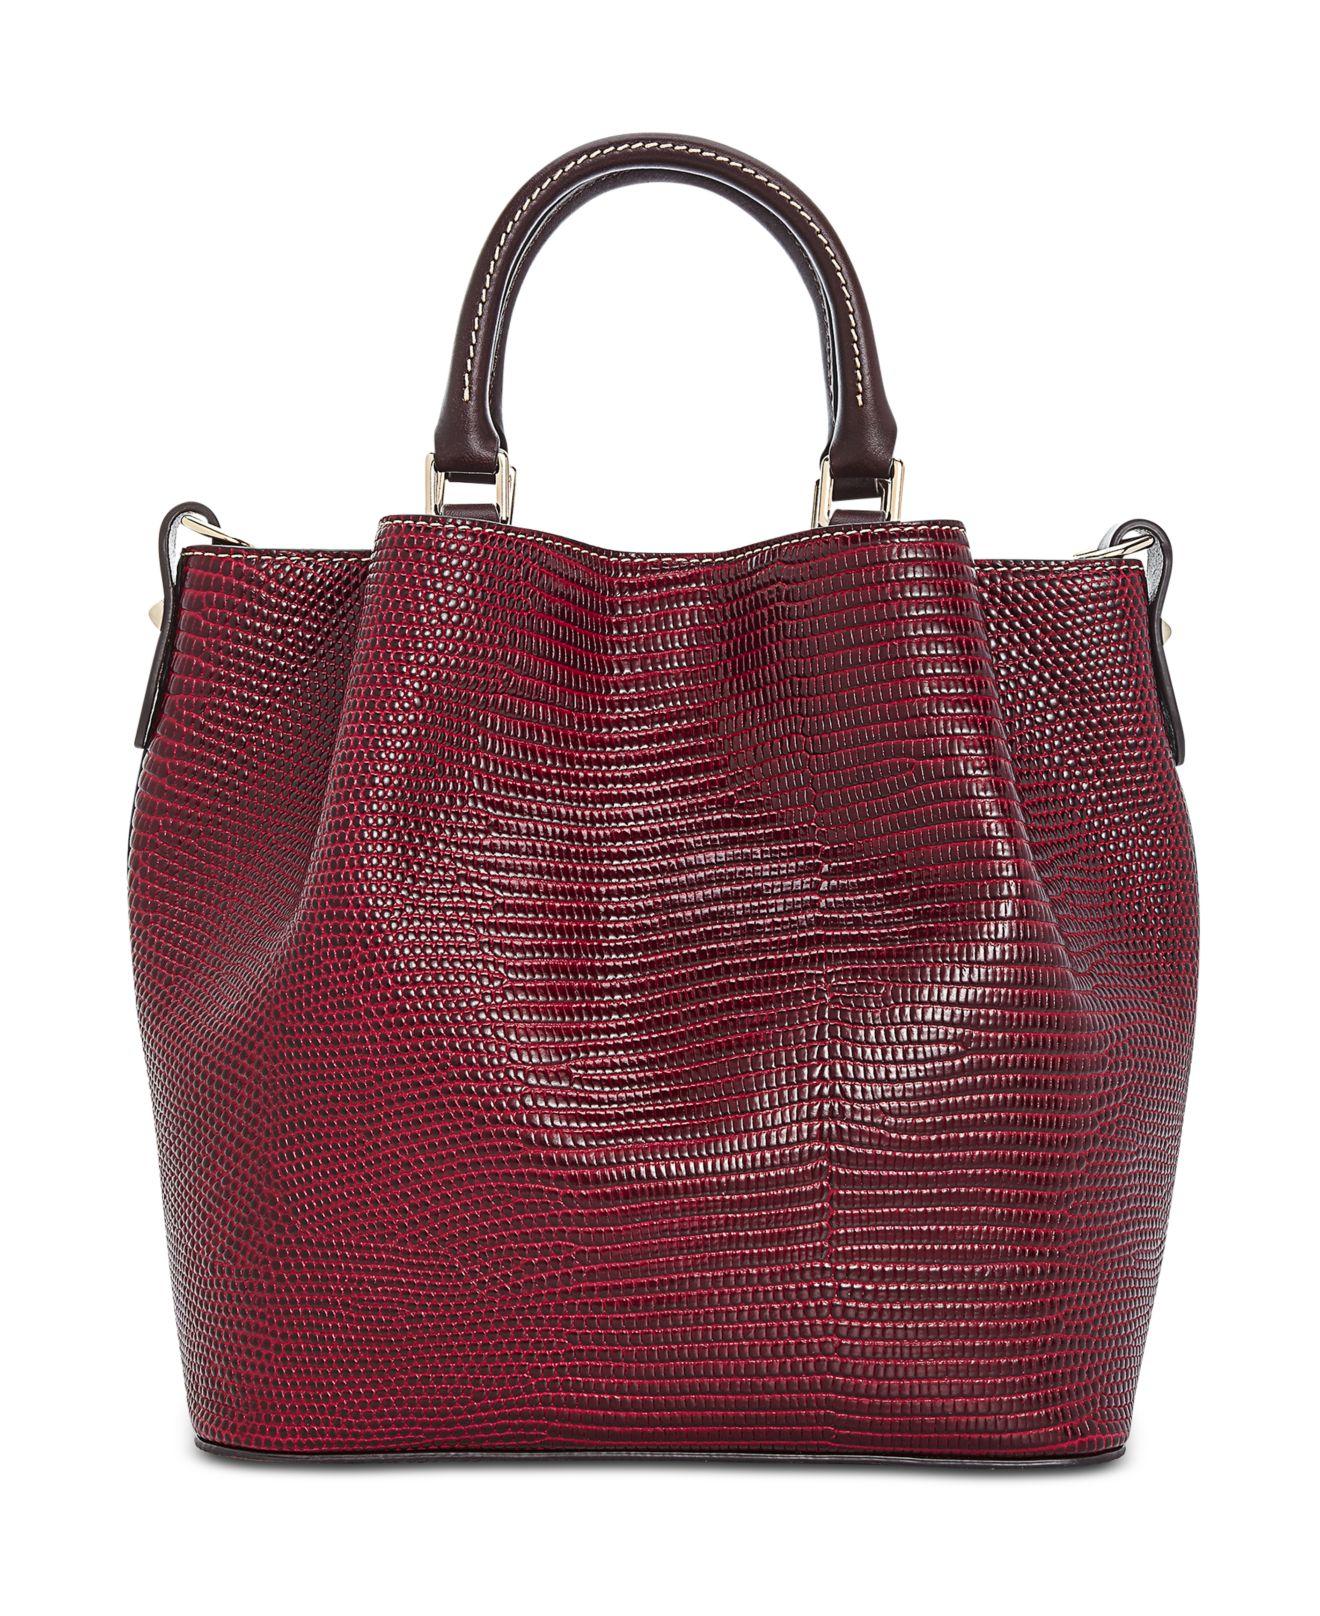 Dooney & Bourke Lizard Embossed Leather Small Barlow Tote in Red - Lyst